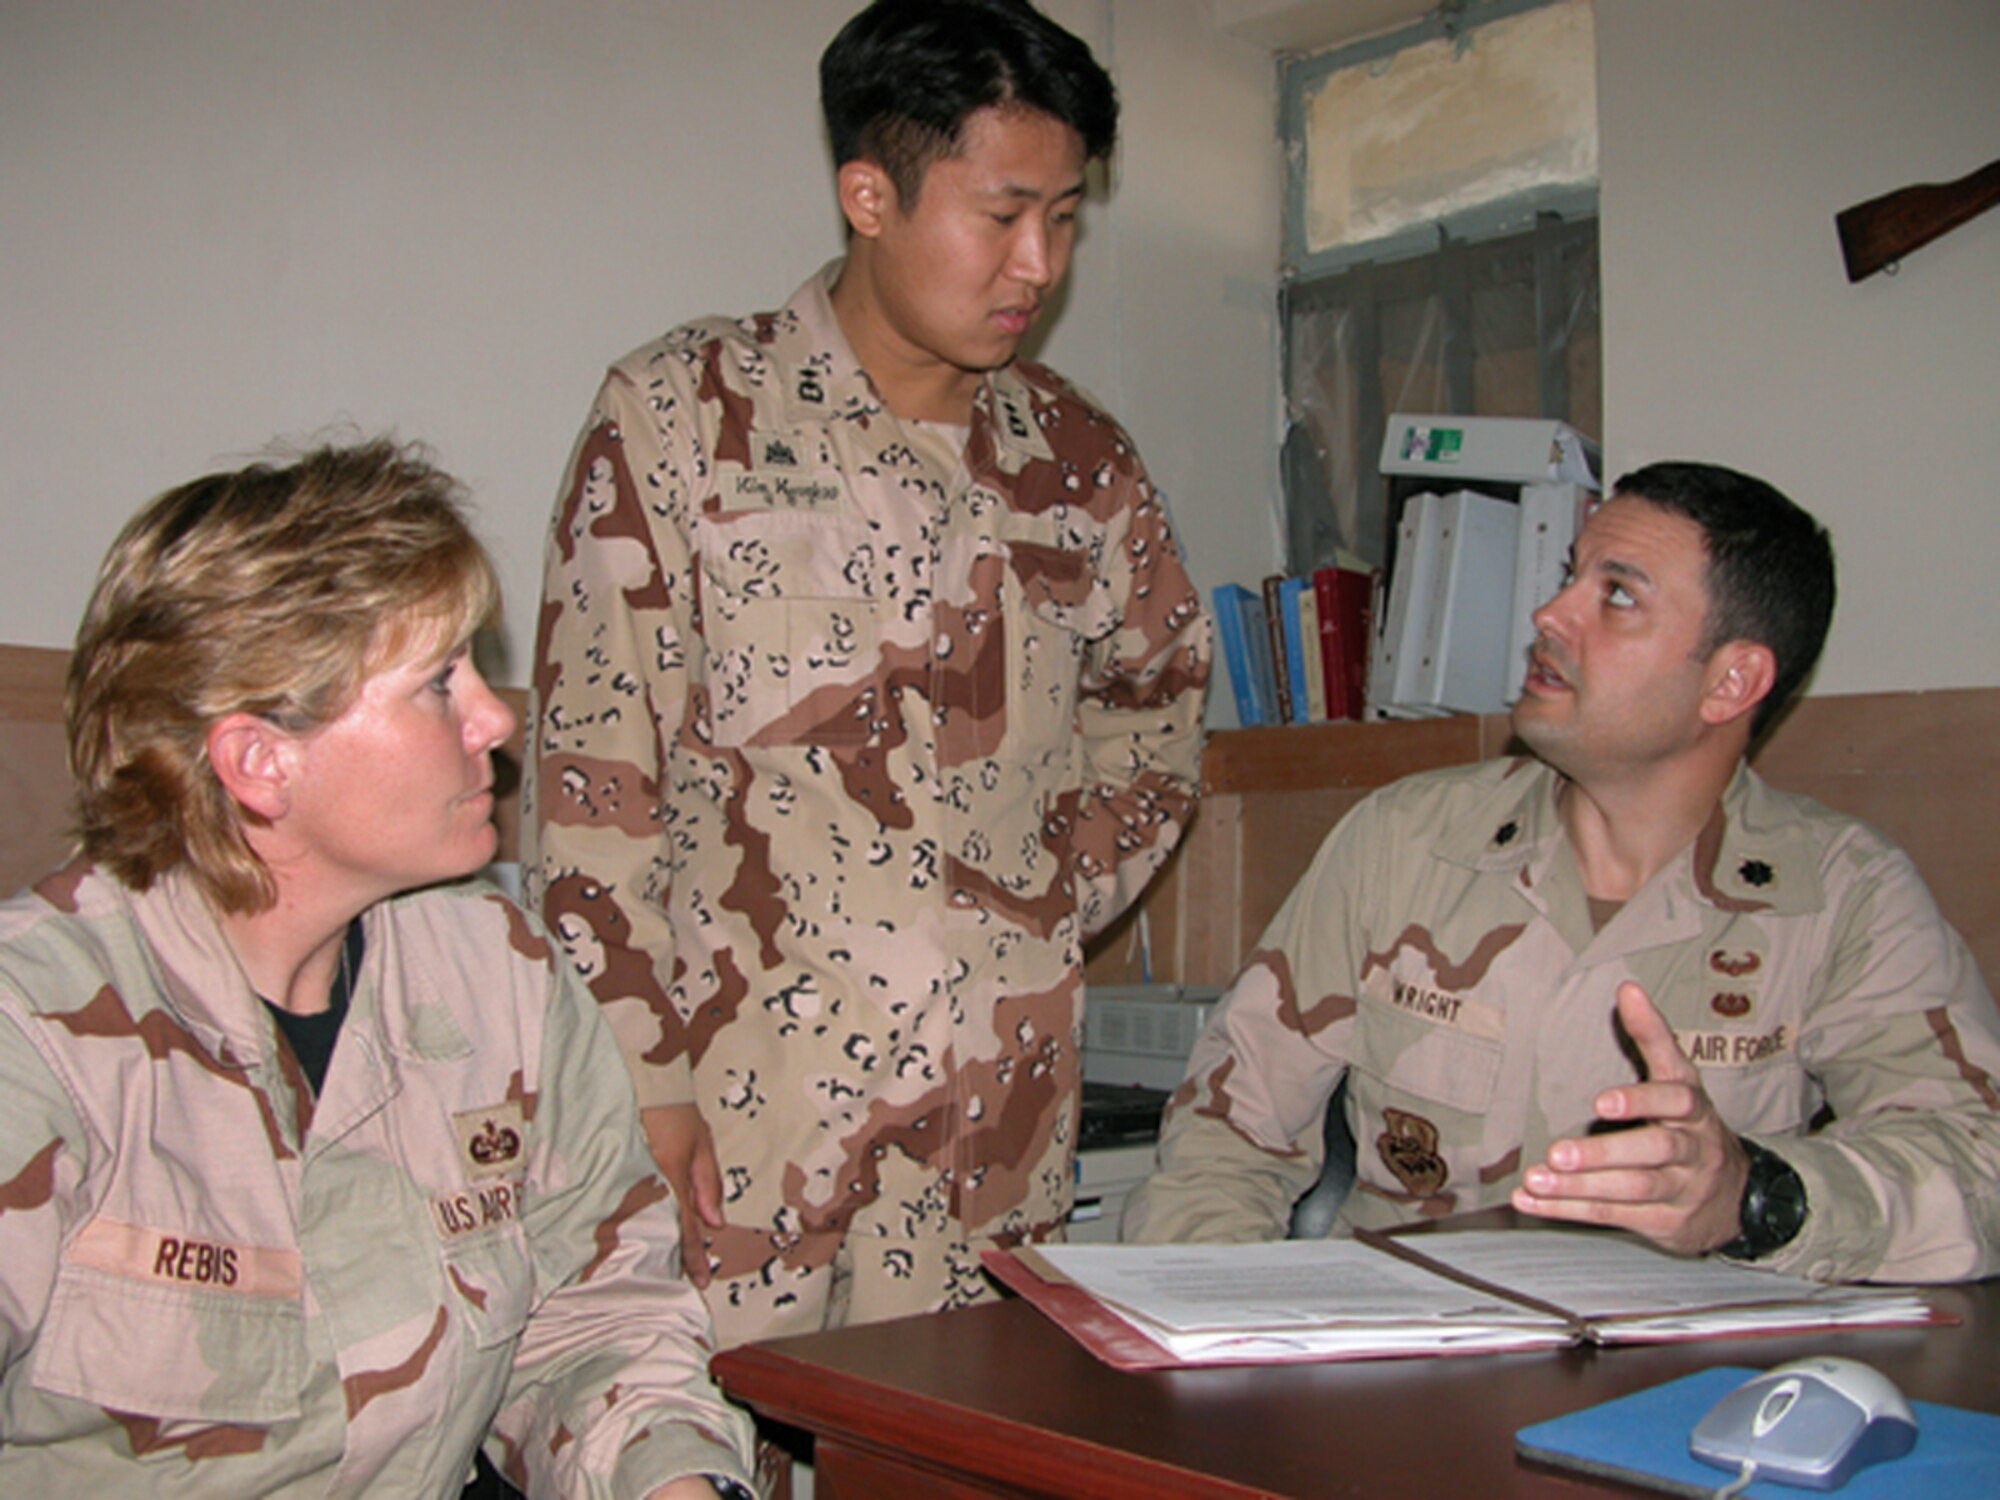 TALLIL AIR BASE, Iraq -- Lt. Col. Brent Wright (right) and Master Sgt. Mary Alice Rebis review a  legal claim with 1st lt. Kim Kwankoo, a Korean military lawyer here.  Colonel Wright and Sergeant Rebis are assigned to the 332nd Air Expeditionary Wing legal office.  (U.S. Air Force photo by Tech. Sgt. Bob Oldham)